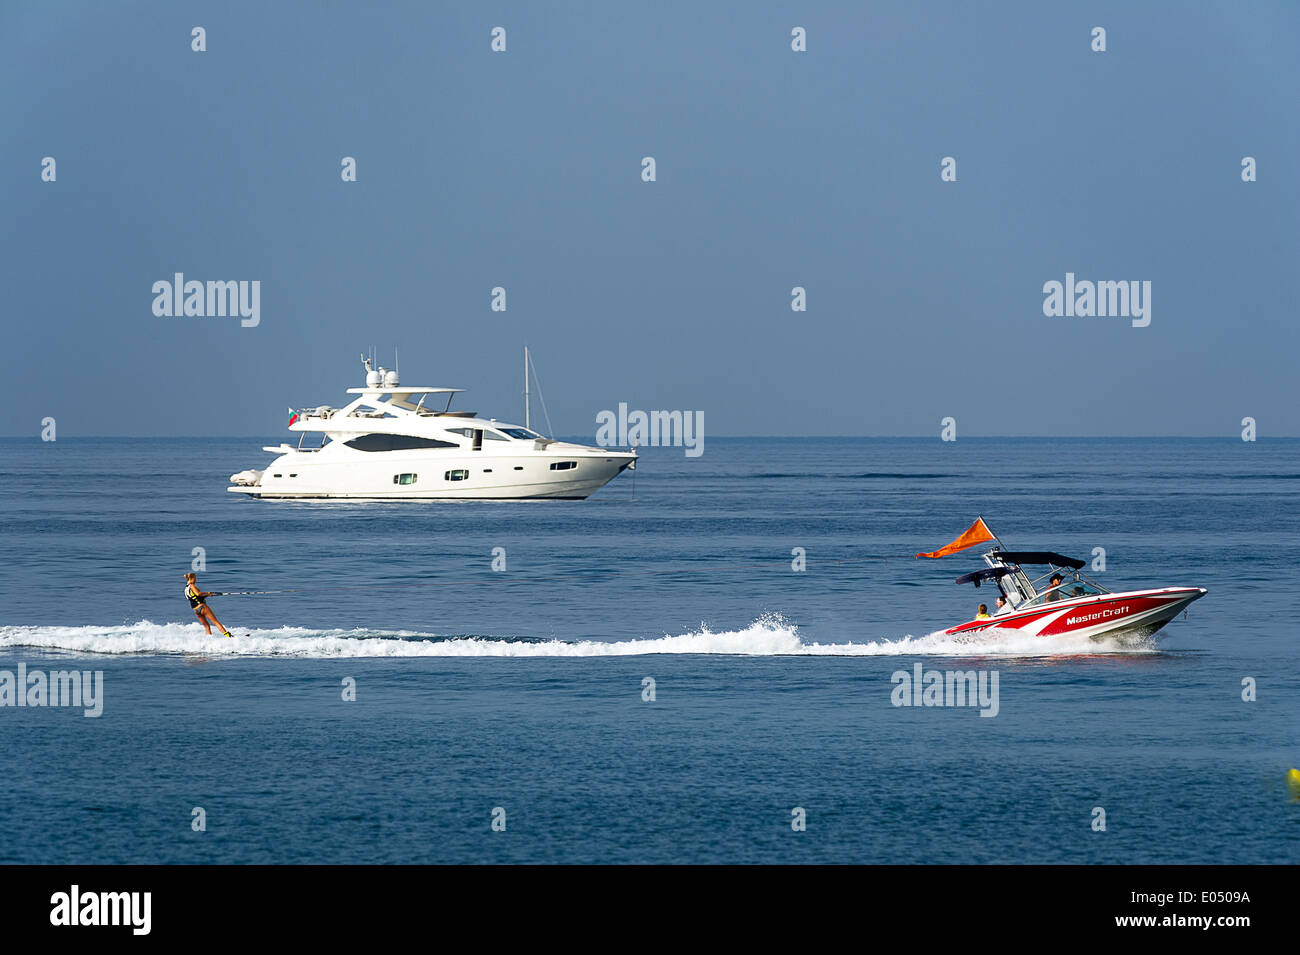 Europe, France, Alpes-Maritimes, Cannes. waterski. Stock Photo